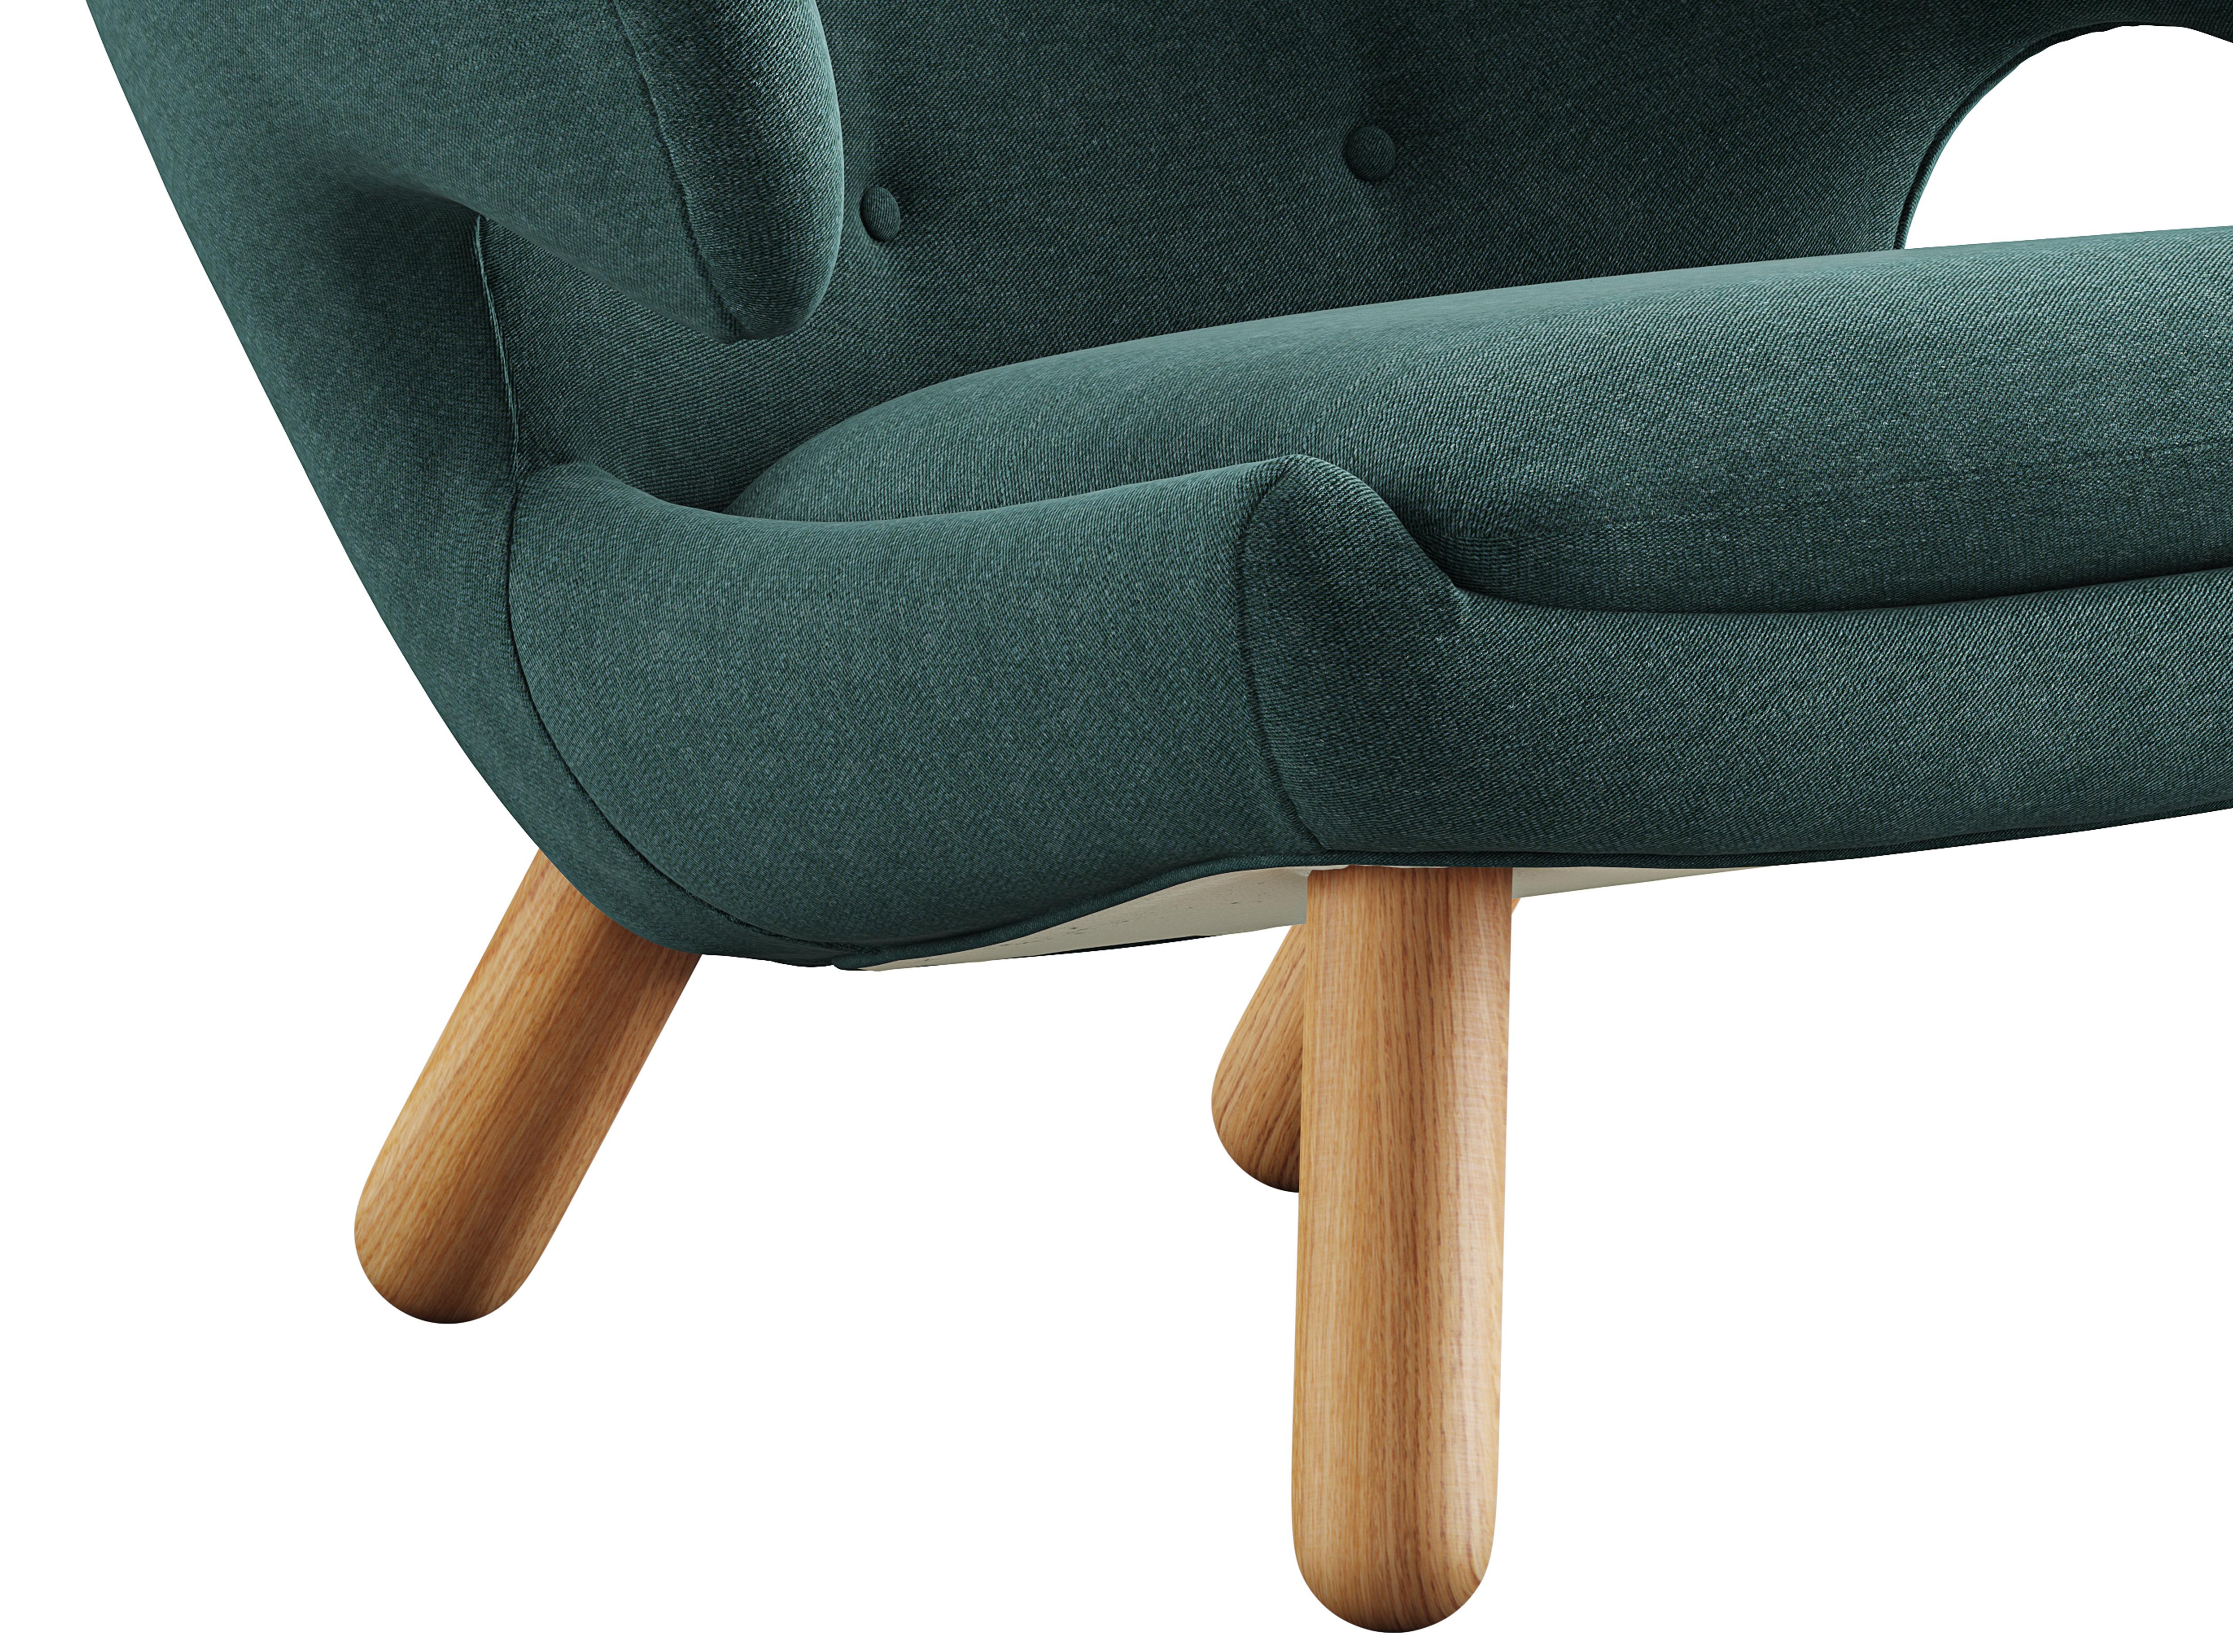 Contemporary Set of Two Finn Juhl Pelican Chairs Upholstered in Wood and Fabric